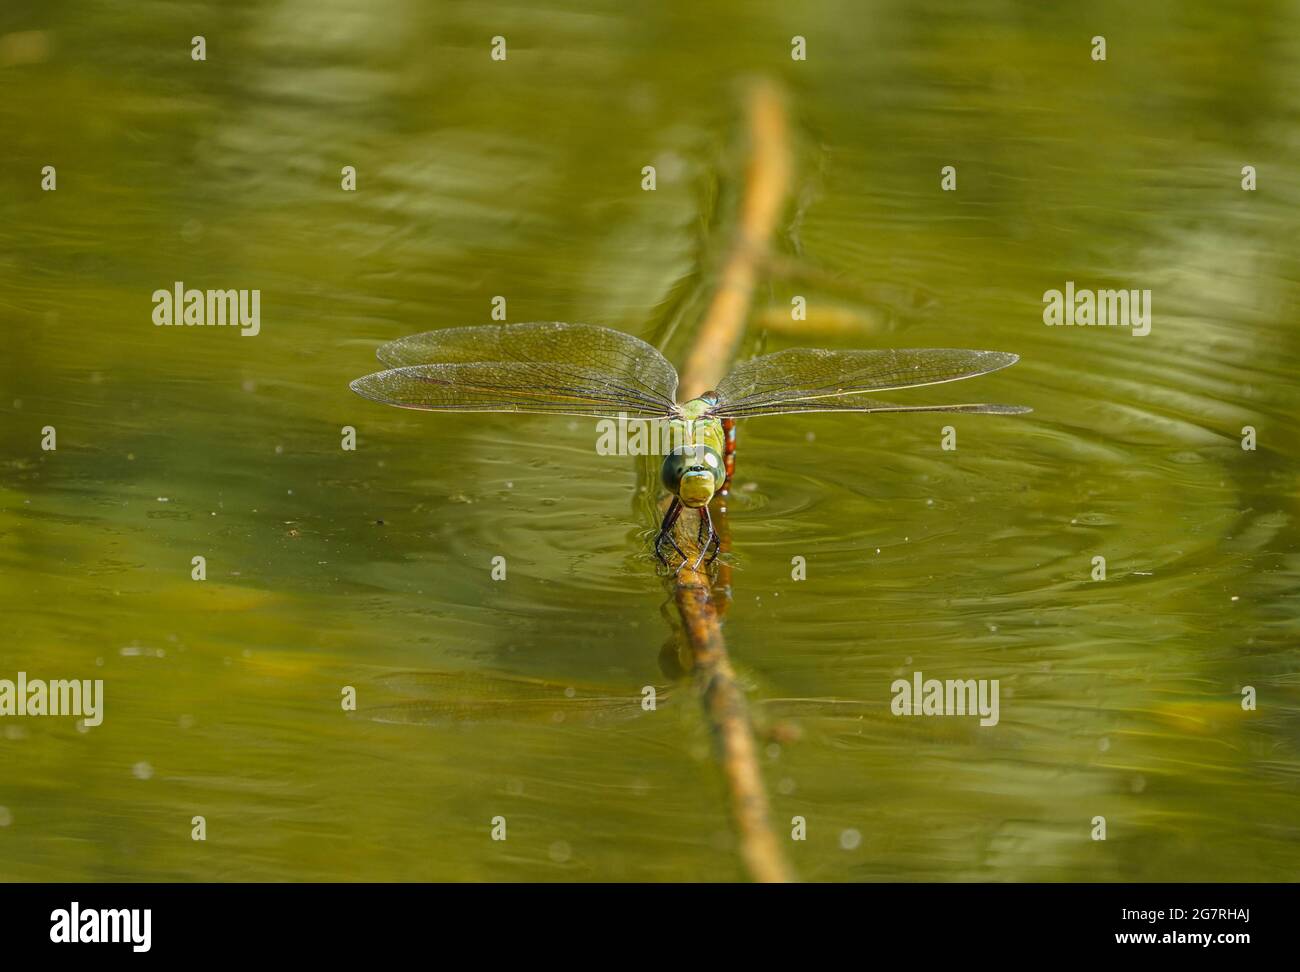 Emperor dragonfly, Anax imperator dragonfly, laying eggs in water. Andalusia, Spain. Stock Photo